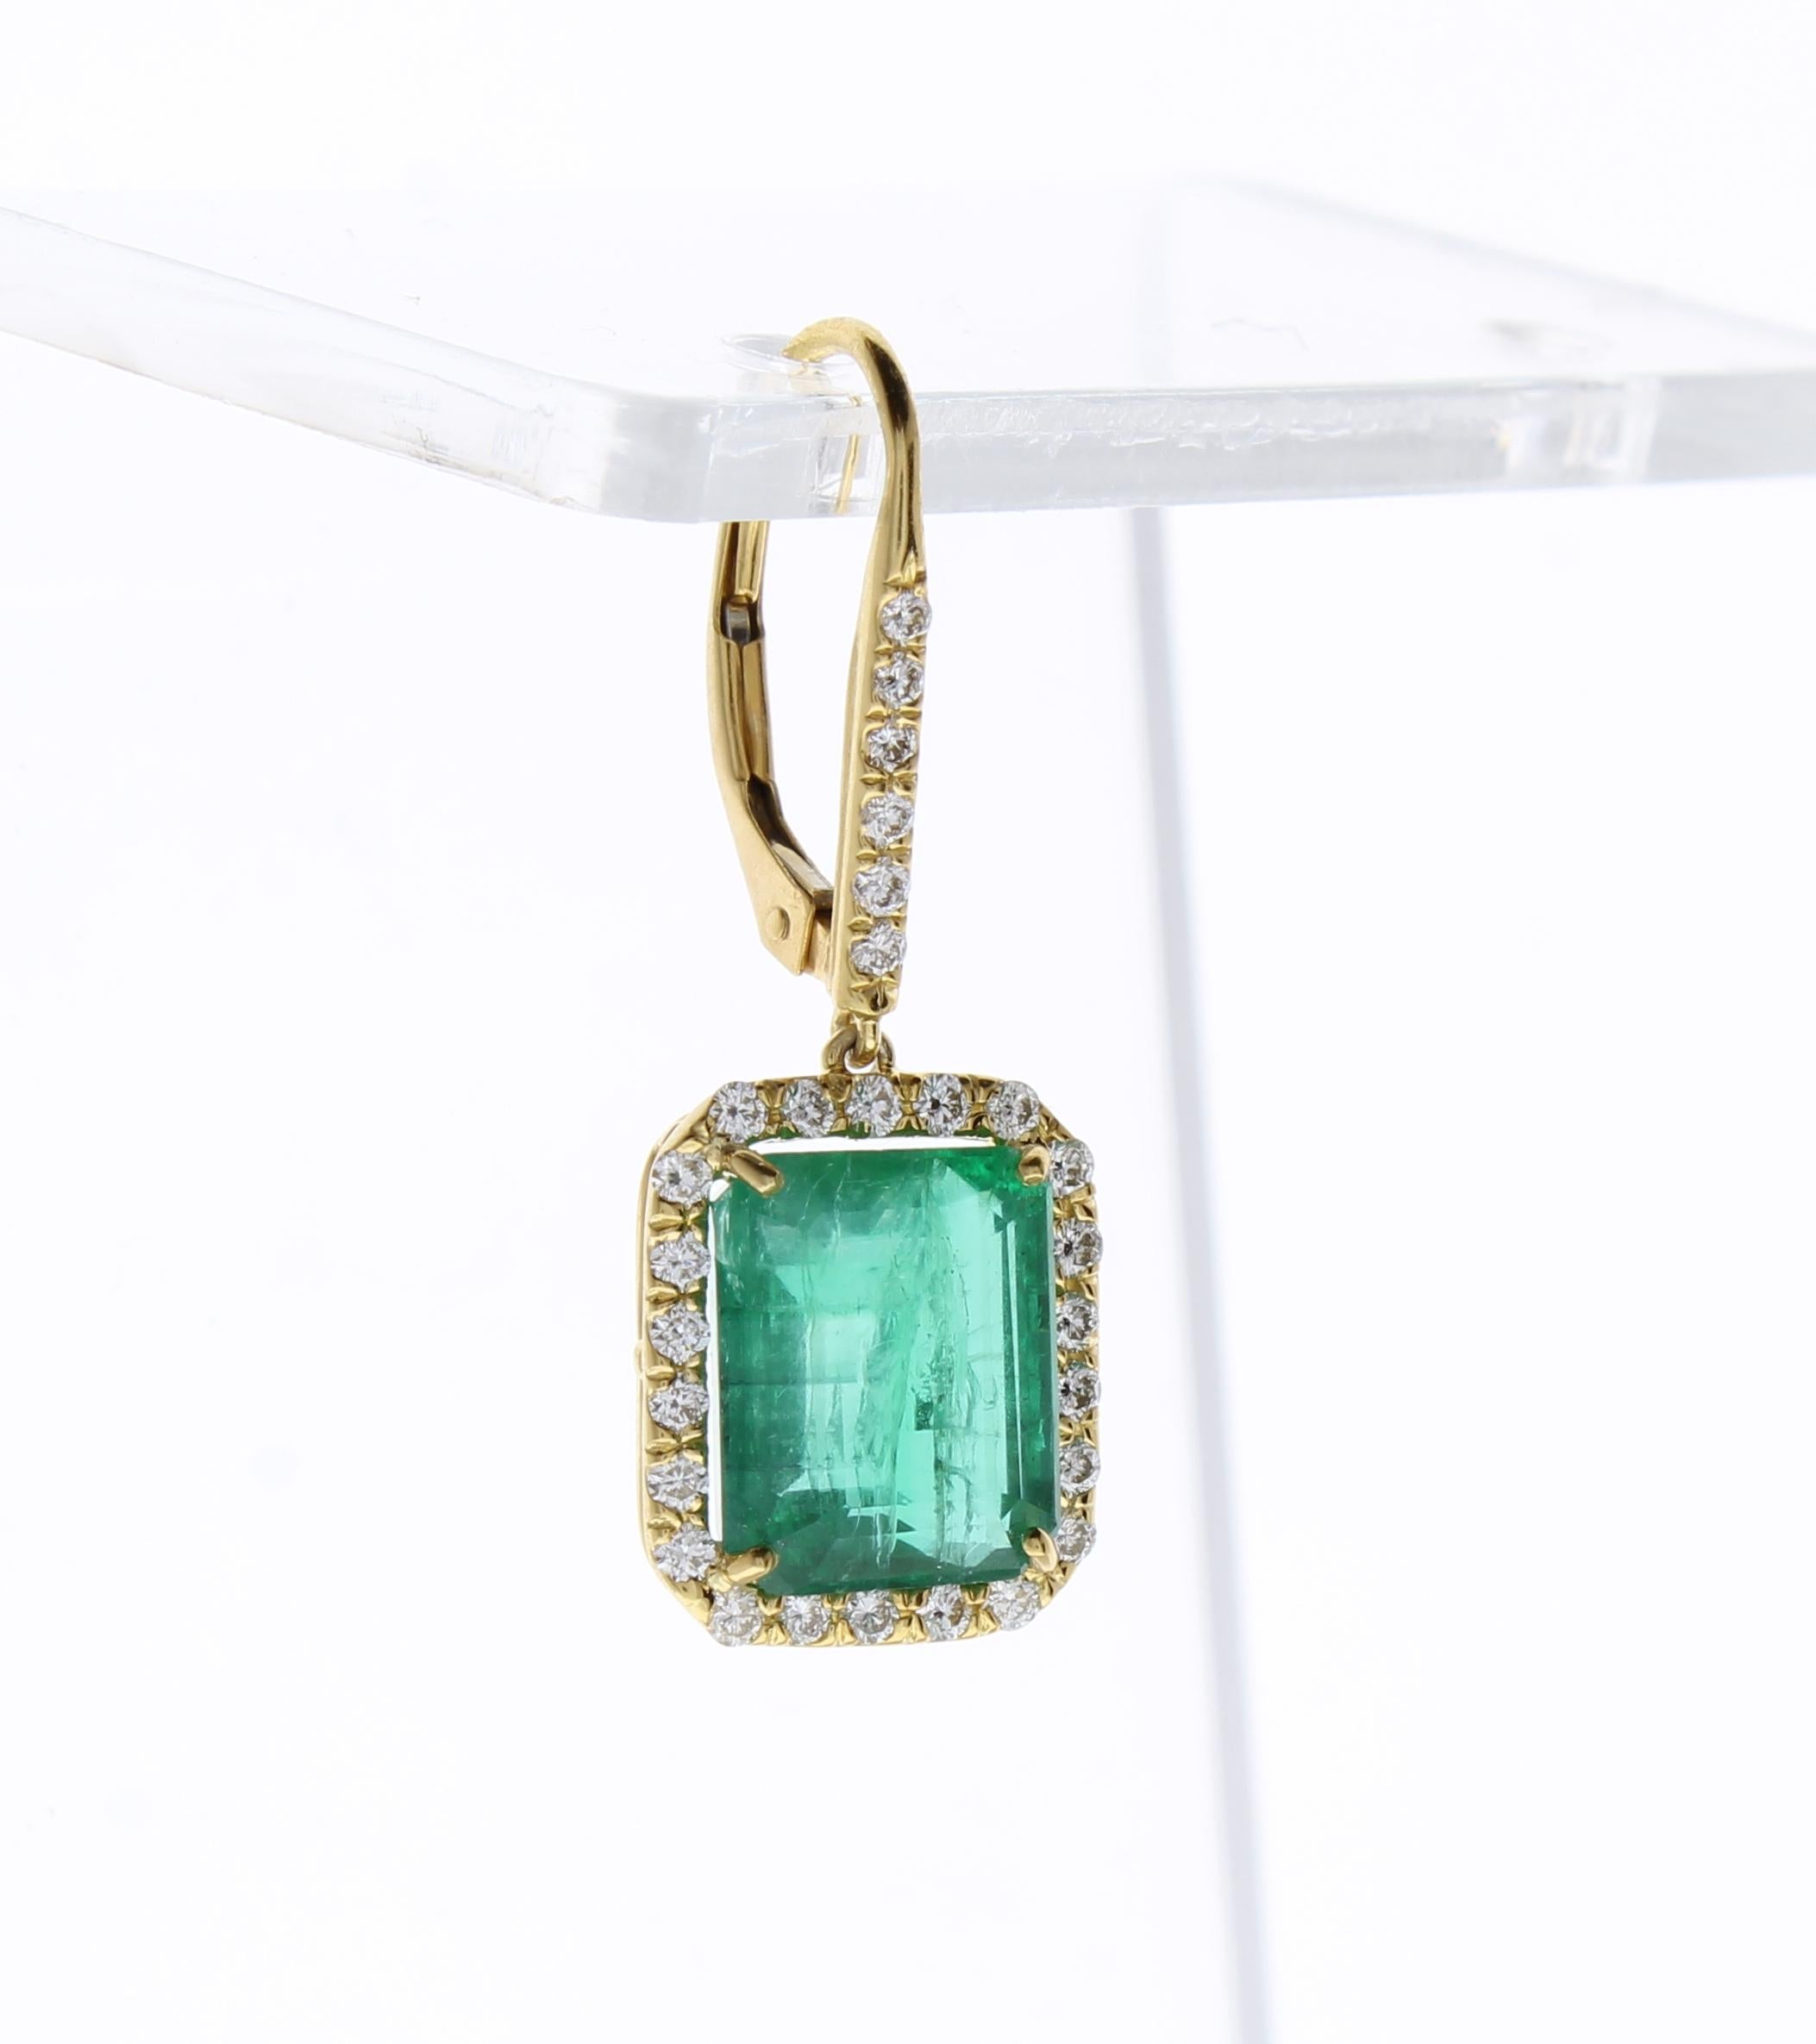 Contemporary GiA Certified 8.55 Carat Total Emerald Cut Emerald & Diamond Earrings In 18K  For Sale